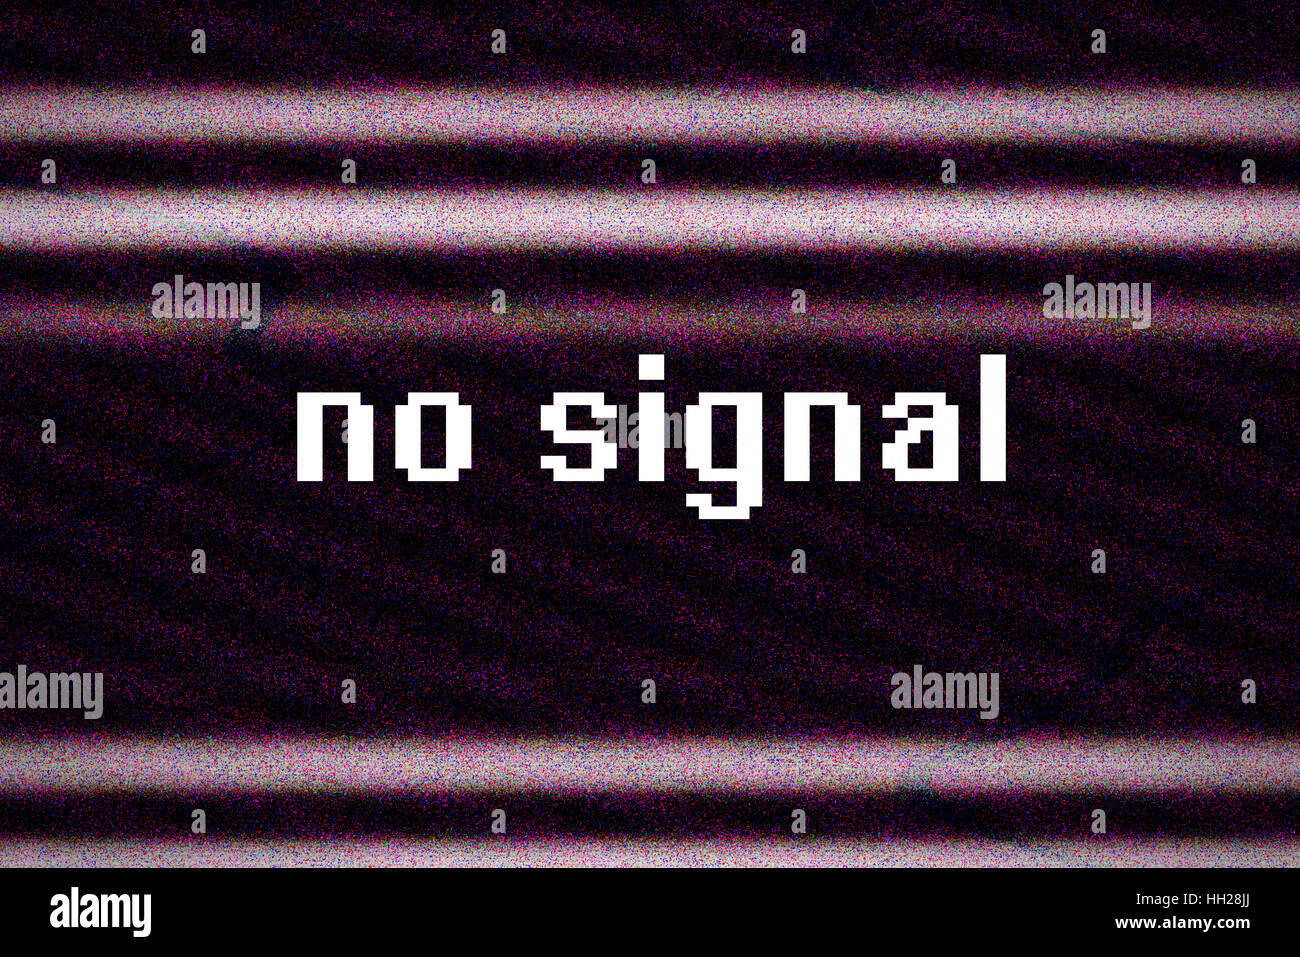 No signal, television broadcast glitch, abstract technology background Stock Photo